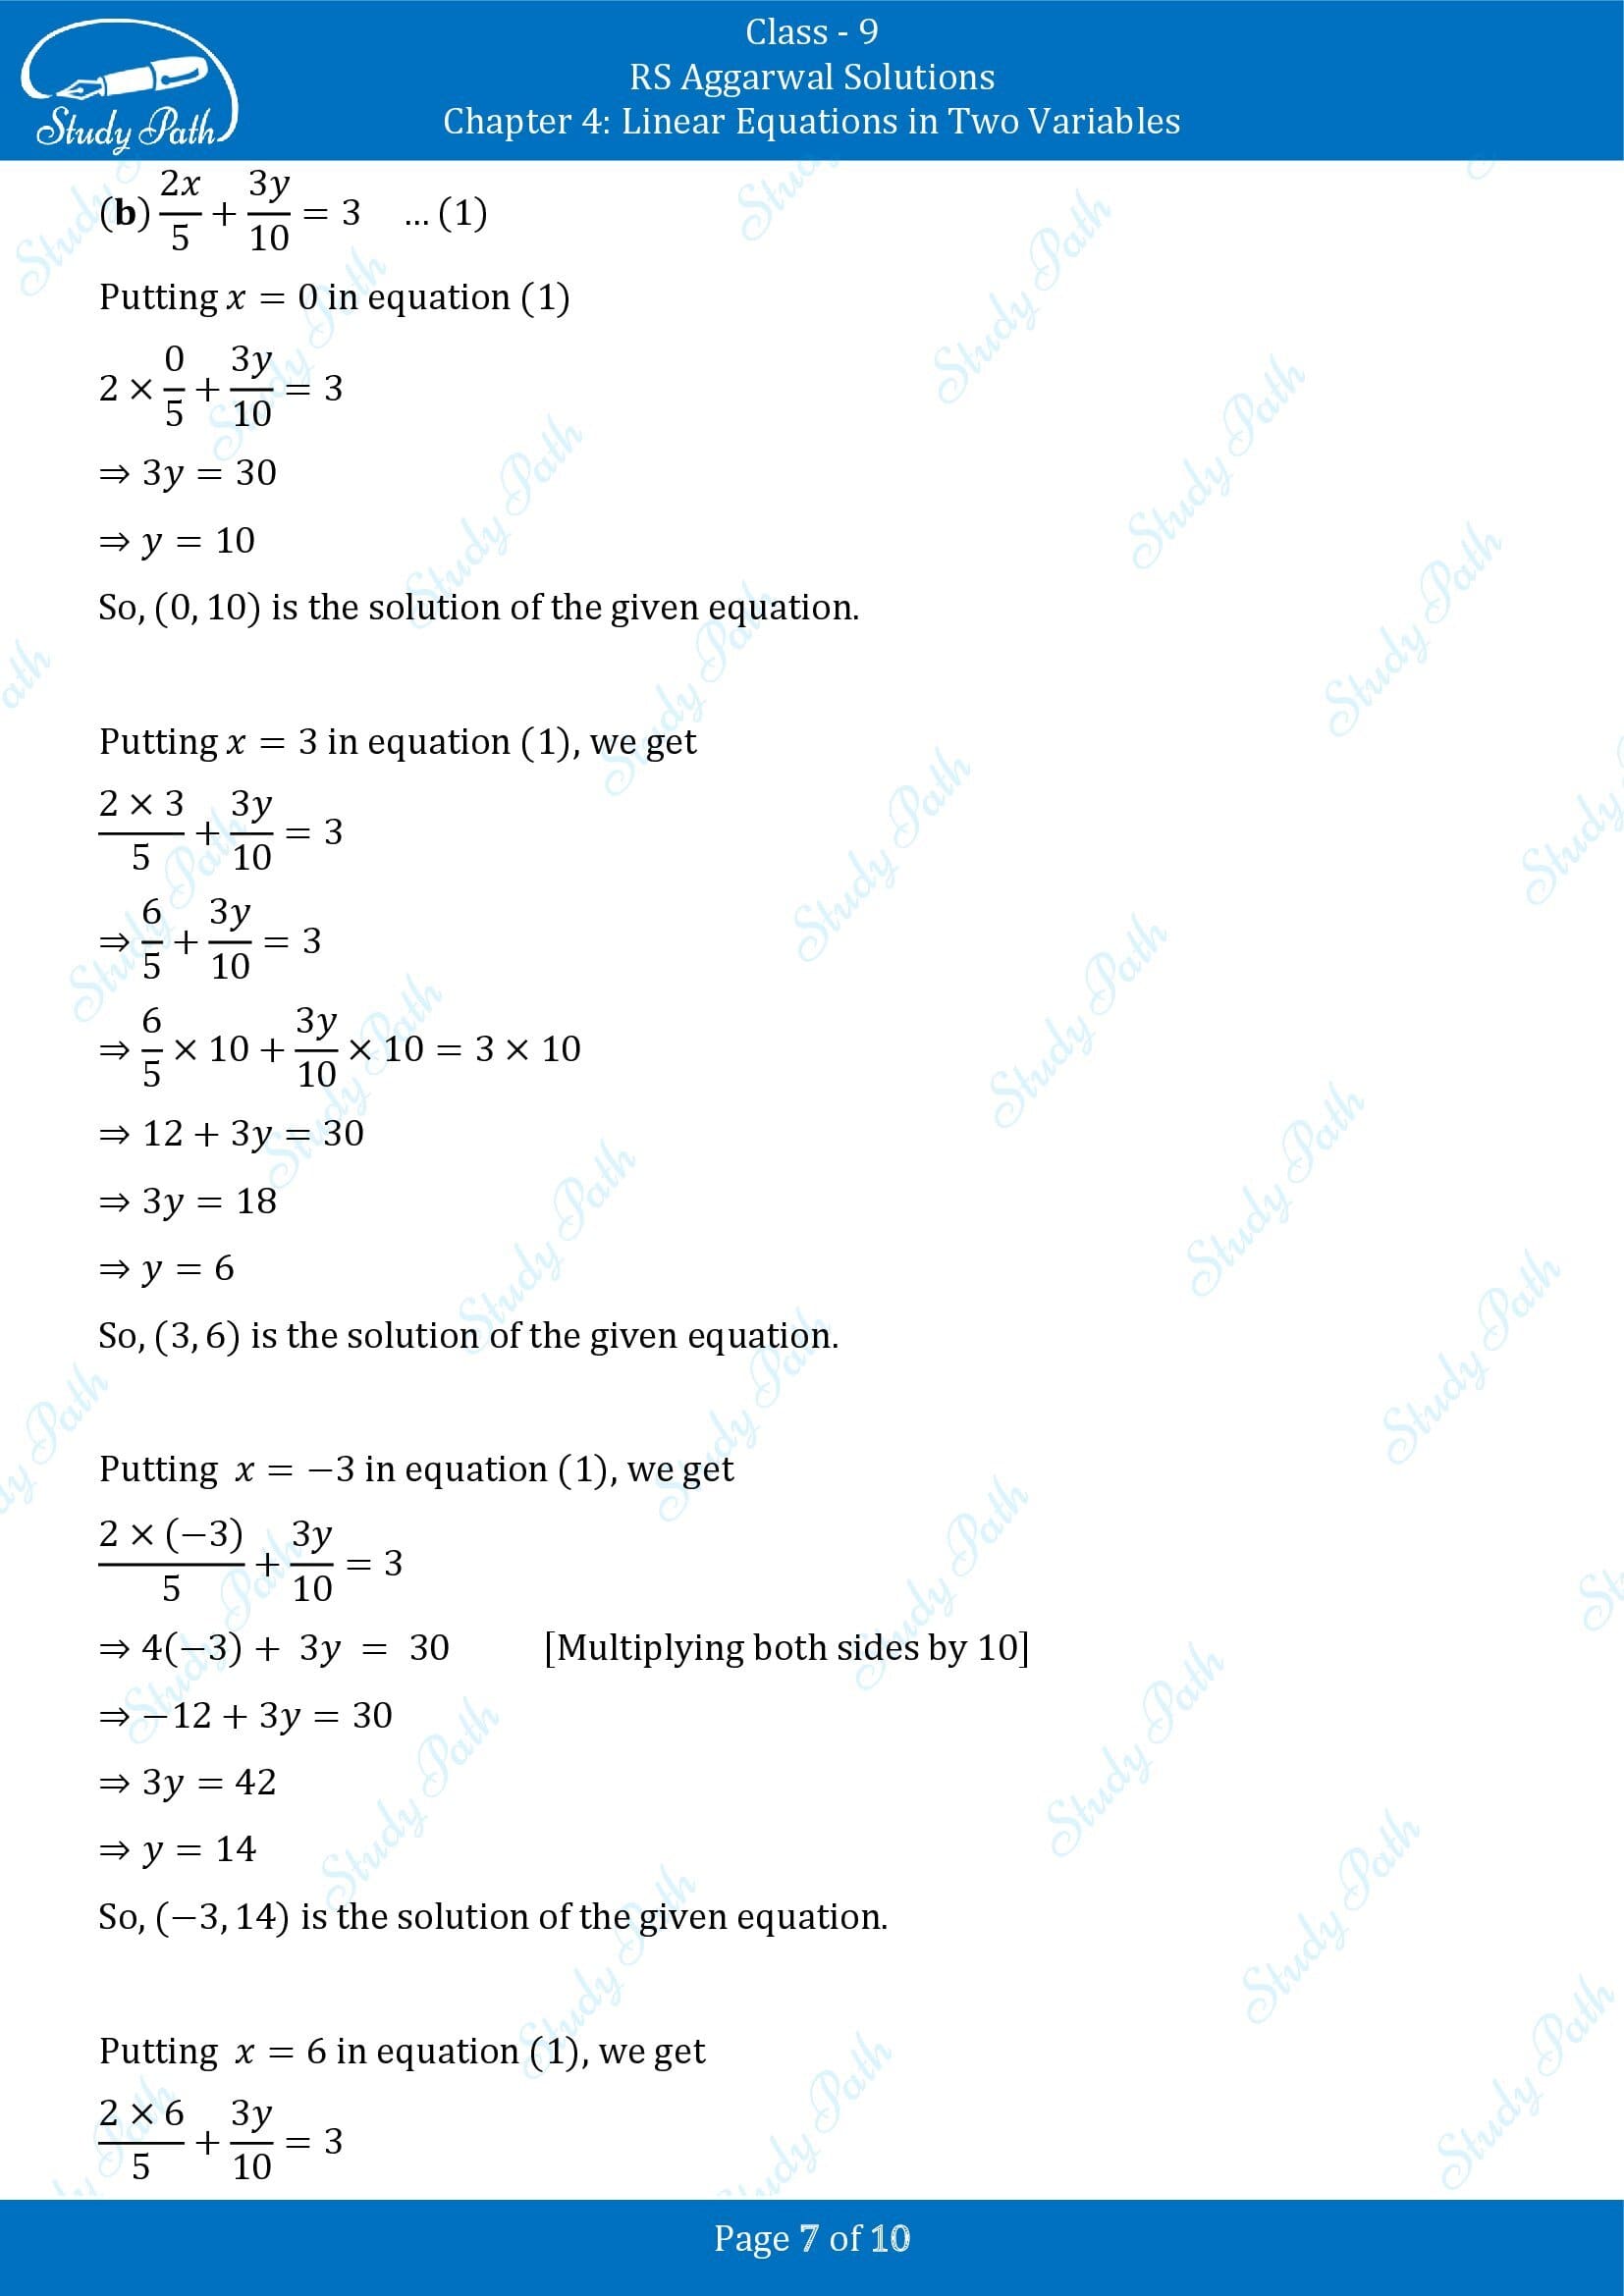 RS Aggarwal Solutions Class 9 Chapter 4 Linear Equations in Two Variables Exercise 4A 0007